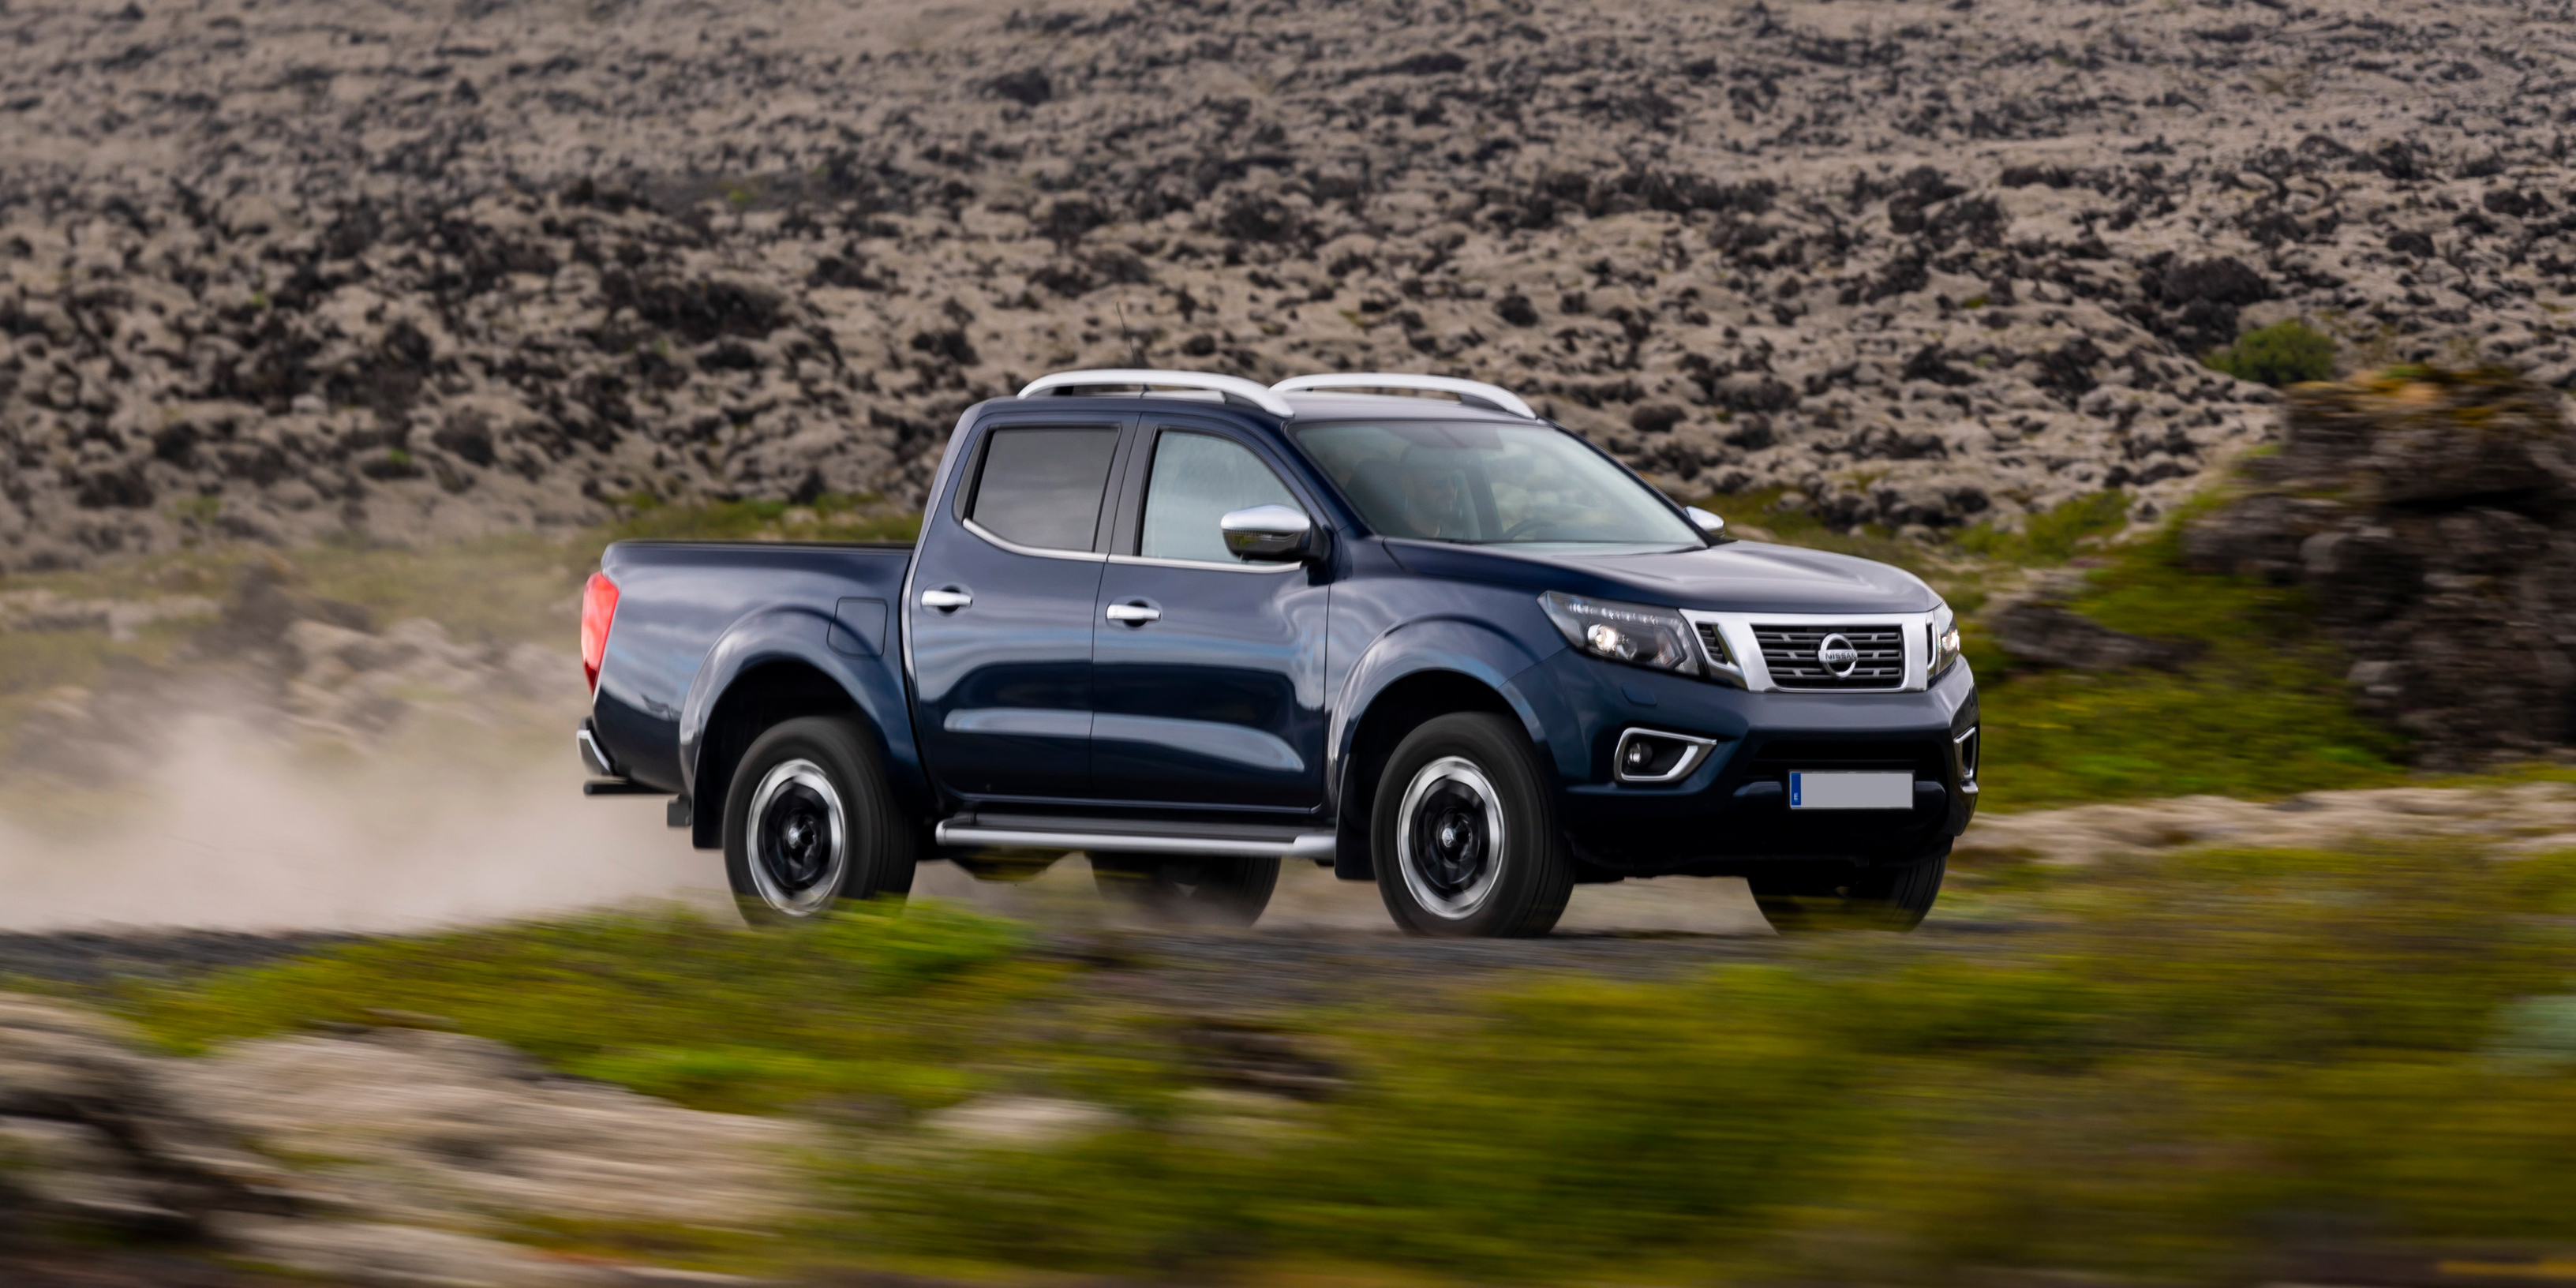 The New Nissan Navara Overview